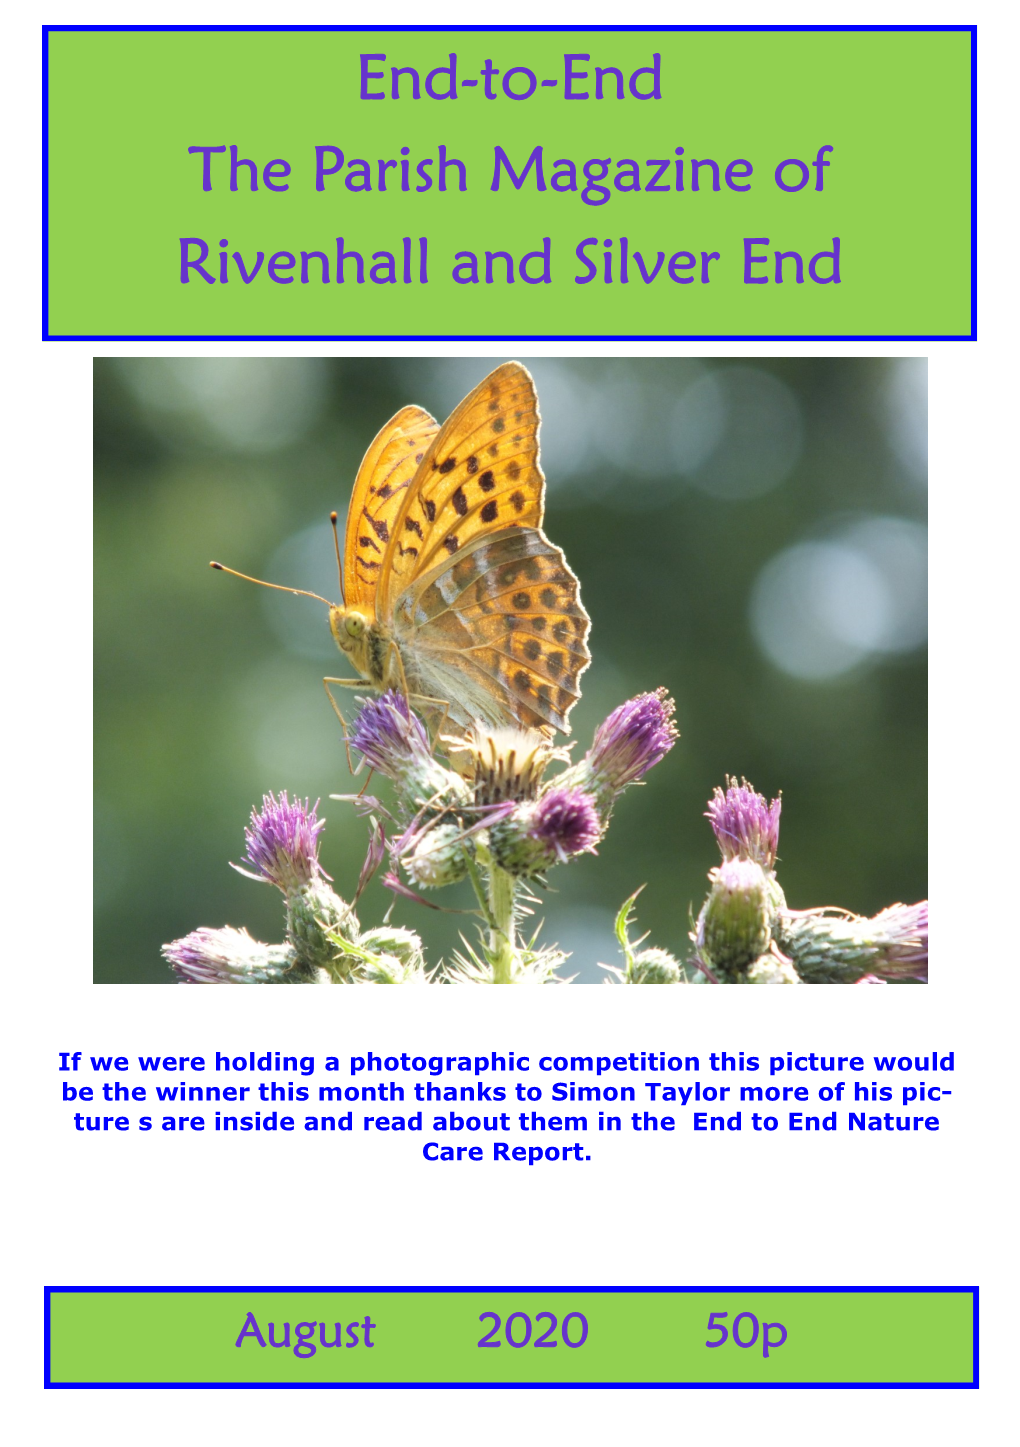 End-To-End the Parish Magazine of Rivenhall and Silver End